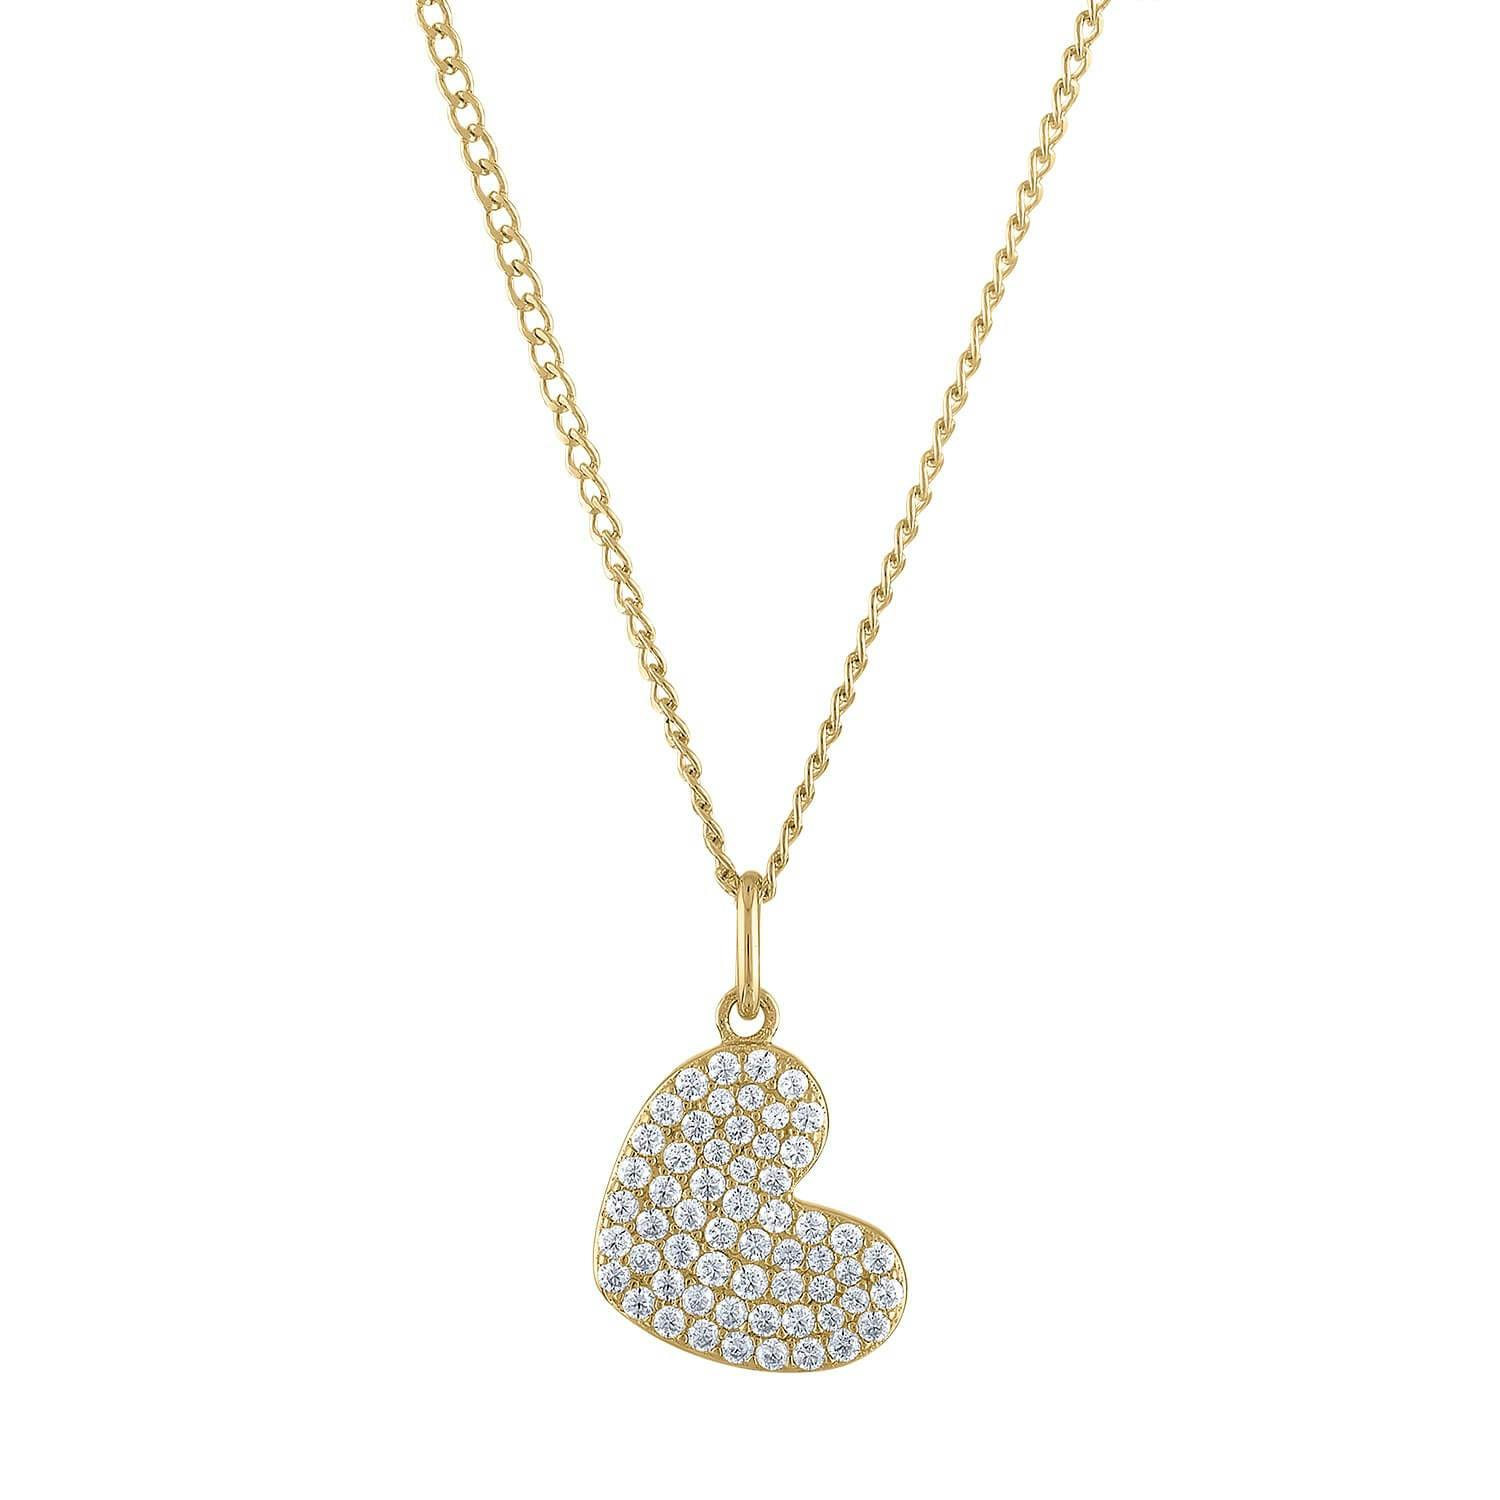 Pave Heart Charm Necklace in Gold